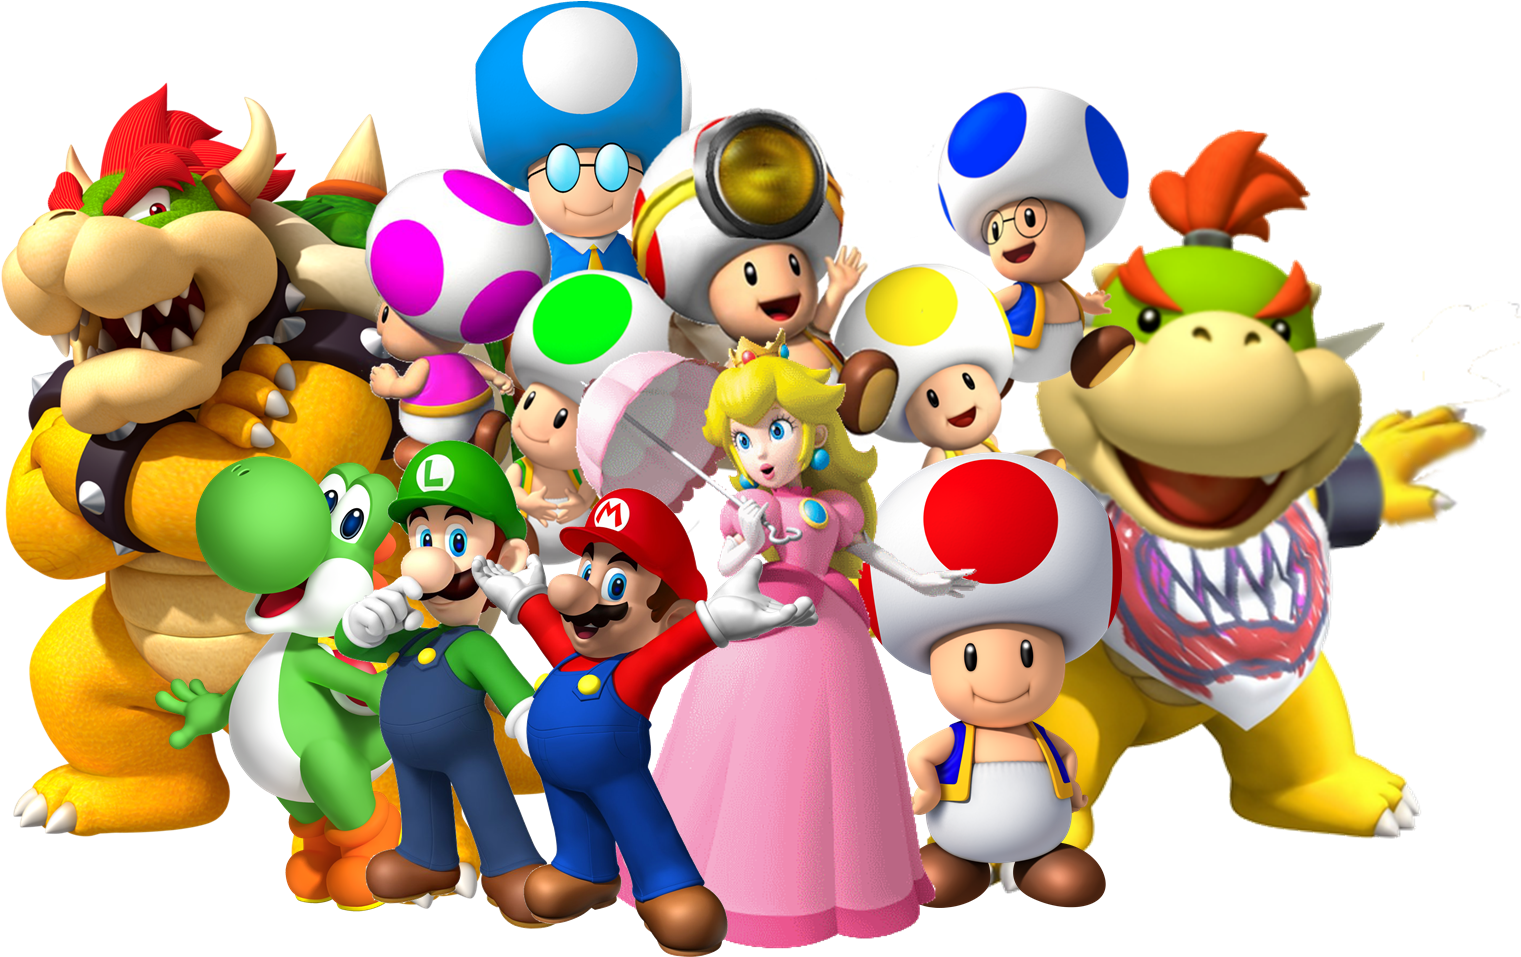 Group Art - Super Mario Characters Group (1561x958)